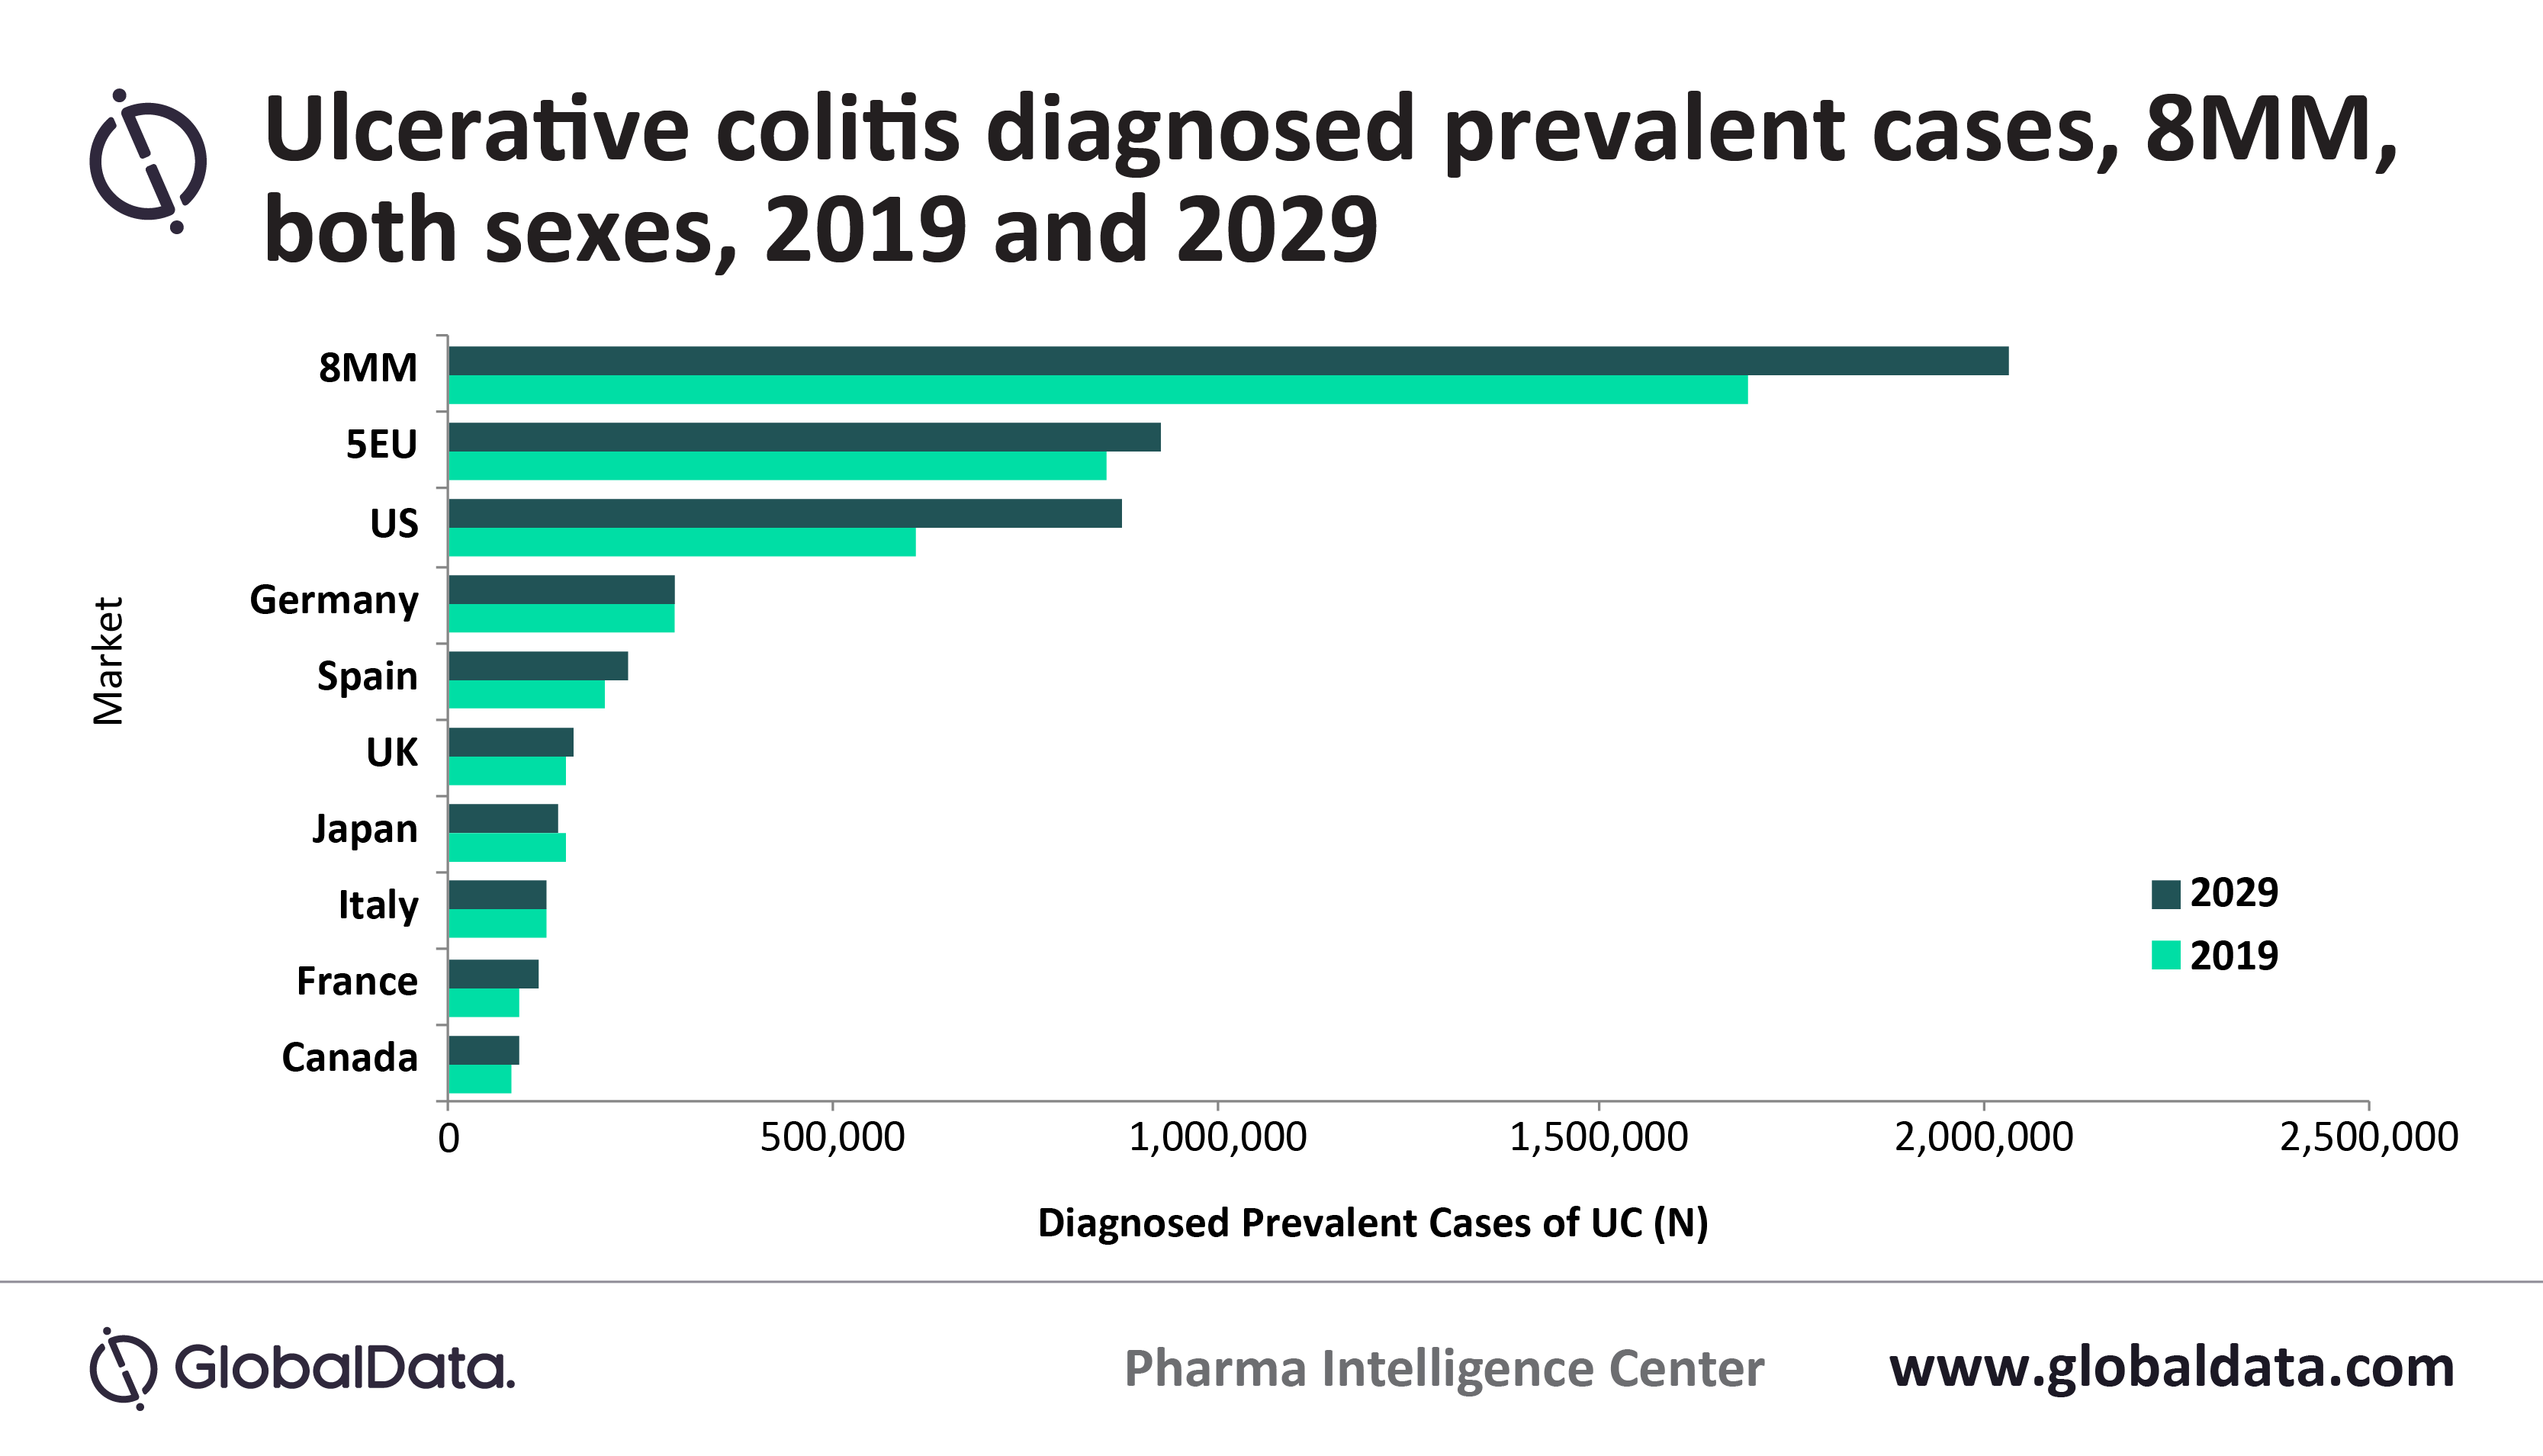 Diagnosed prevalent cases of ulcerative colitis to reach 2 million by